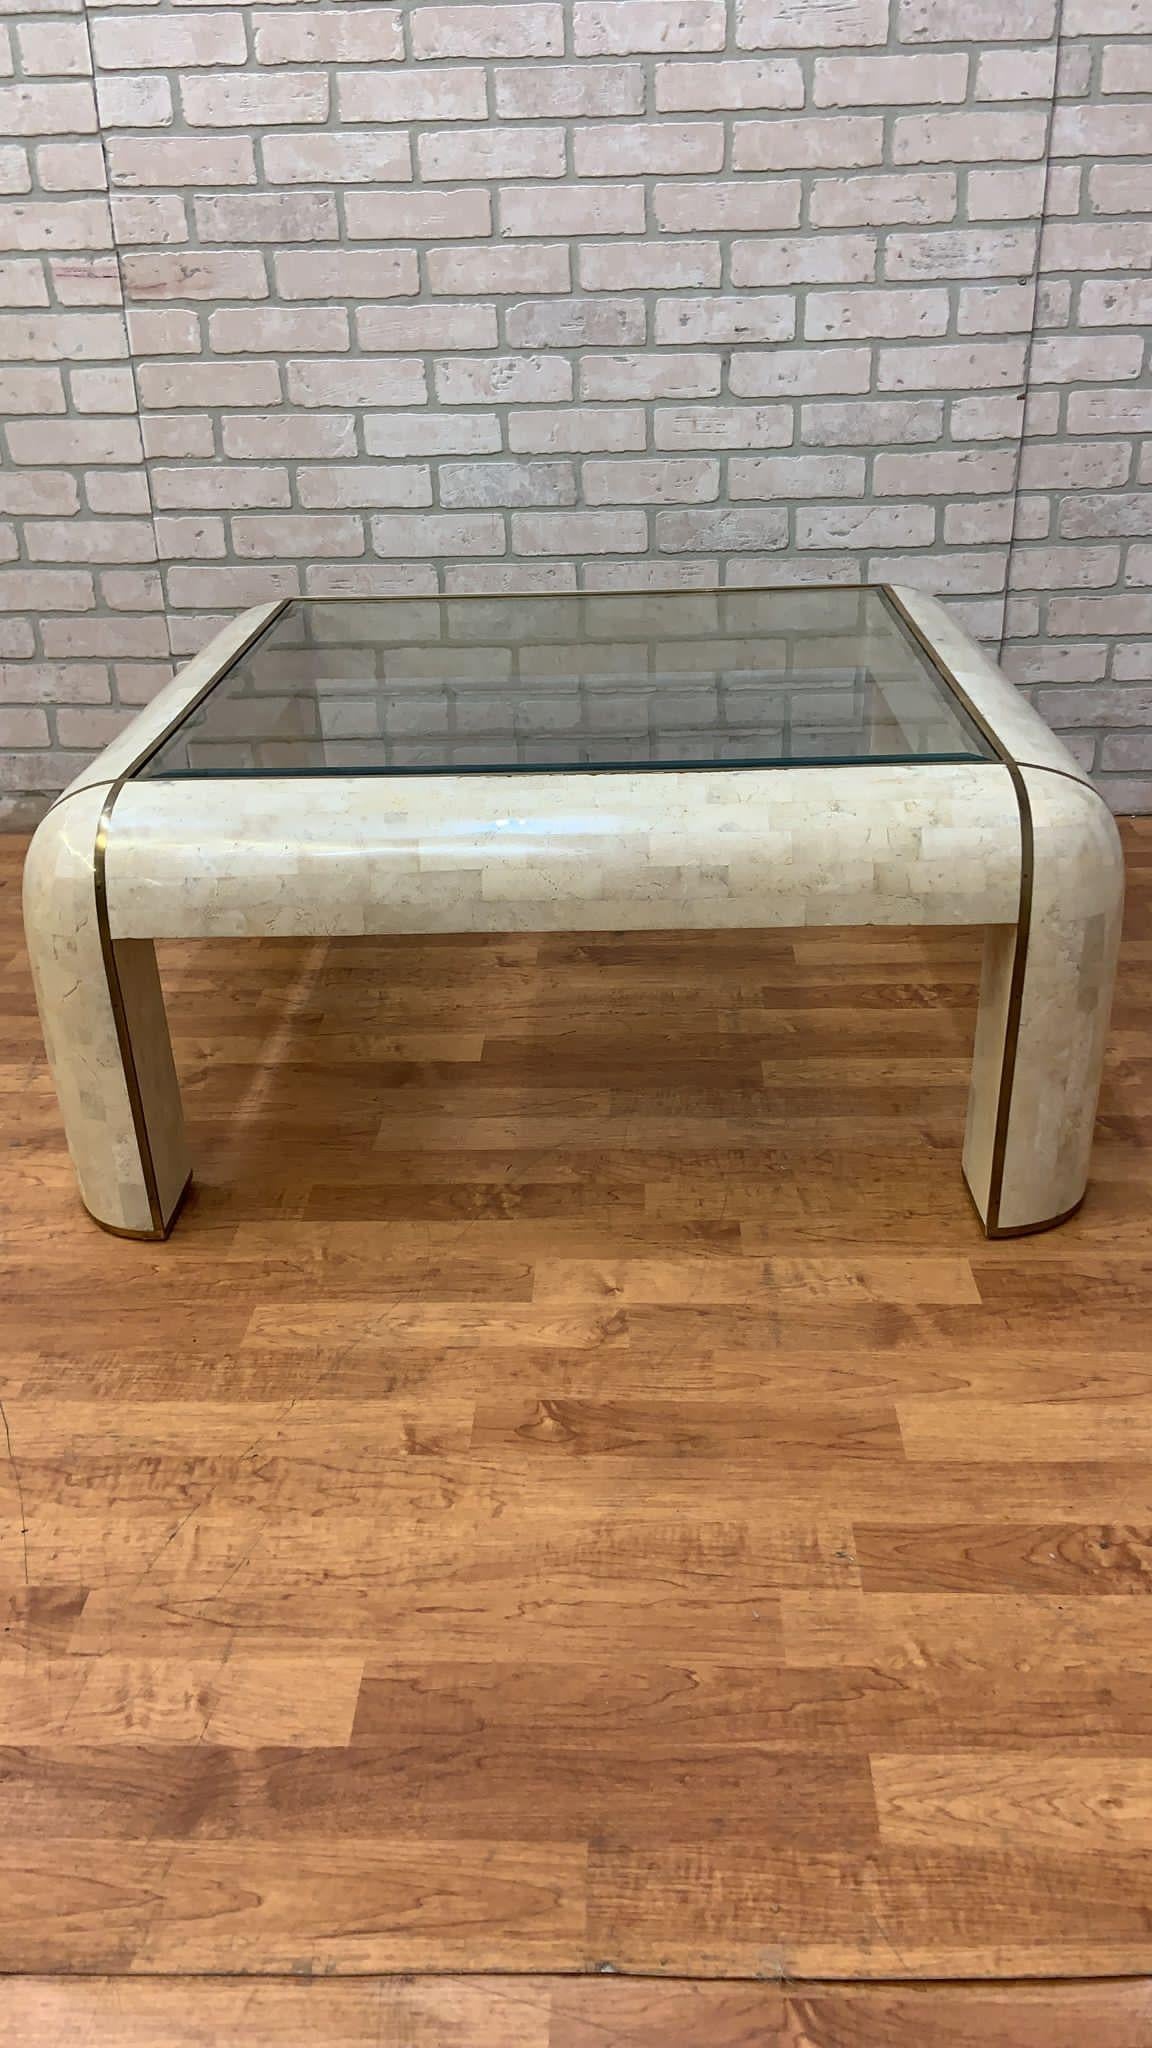 Mid Century Modern Karl Springer Style Tessellated Marble Coffee Table

Vintage Mid Century Modern Curve Form Tessellated Marble Coffee Table. This Table is Inlaid with brass banding and has a beveled glass inset top.

Circa 1970’s

Dimensions:
H: